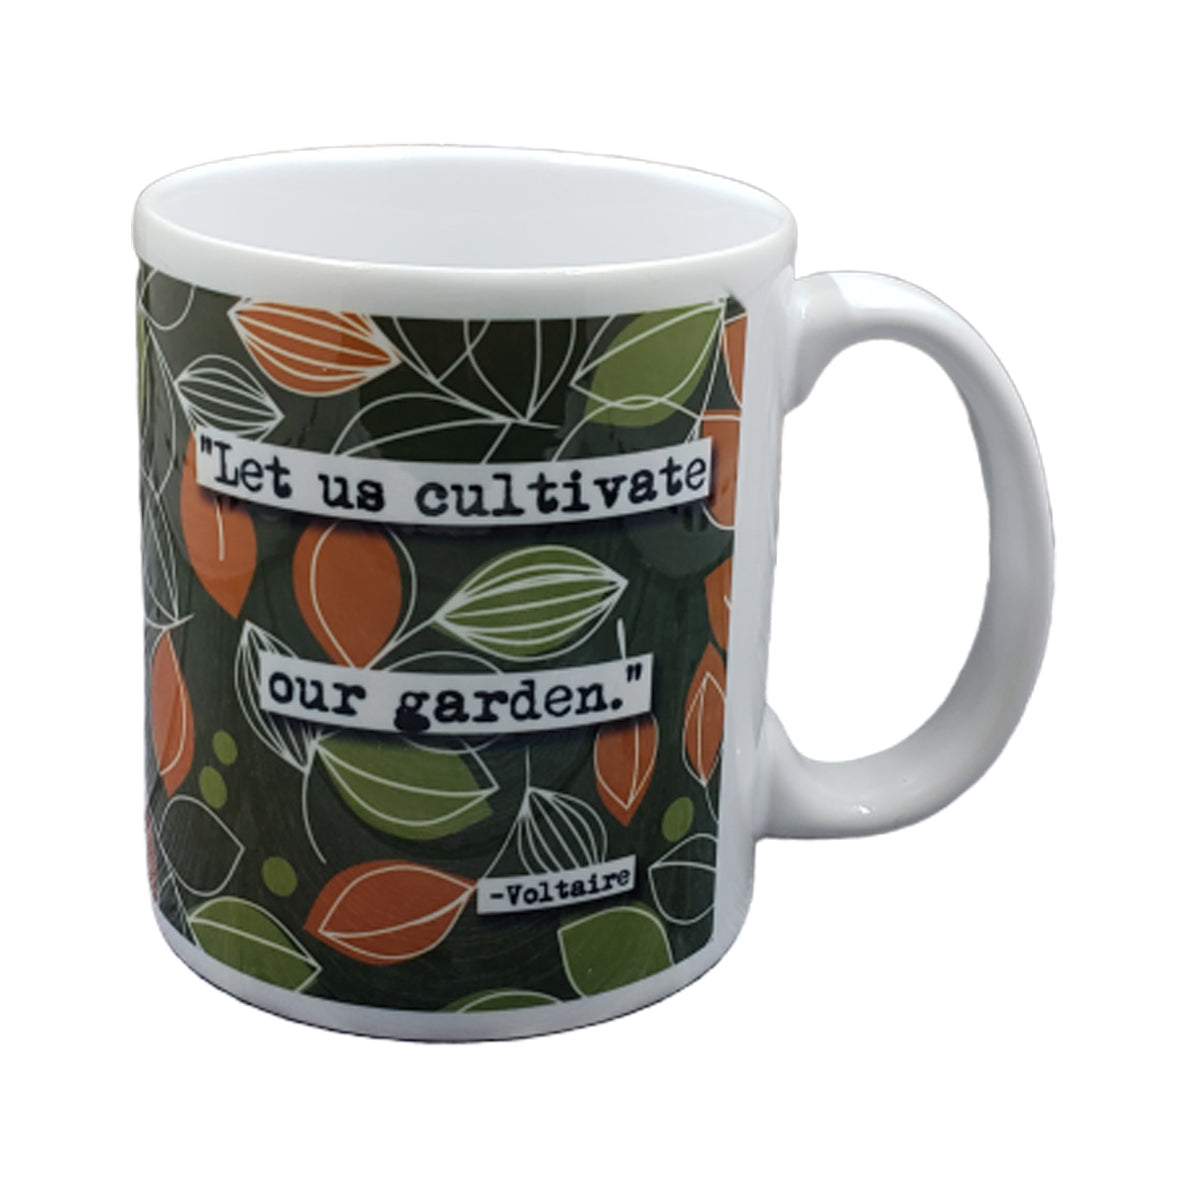 Voltaire Cultivate Our Gardens Quote Mug